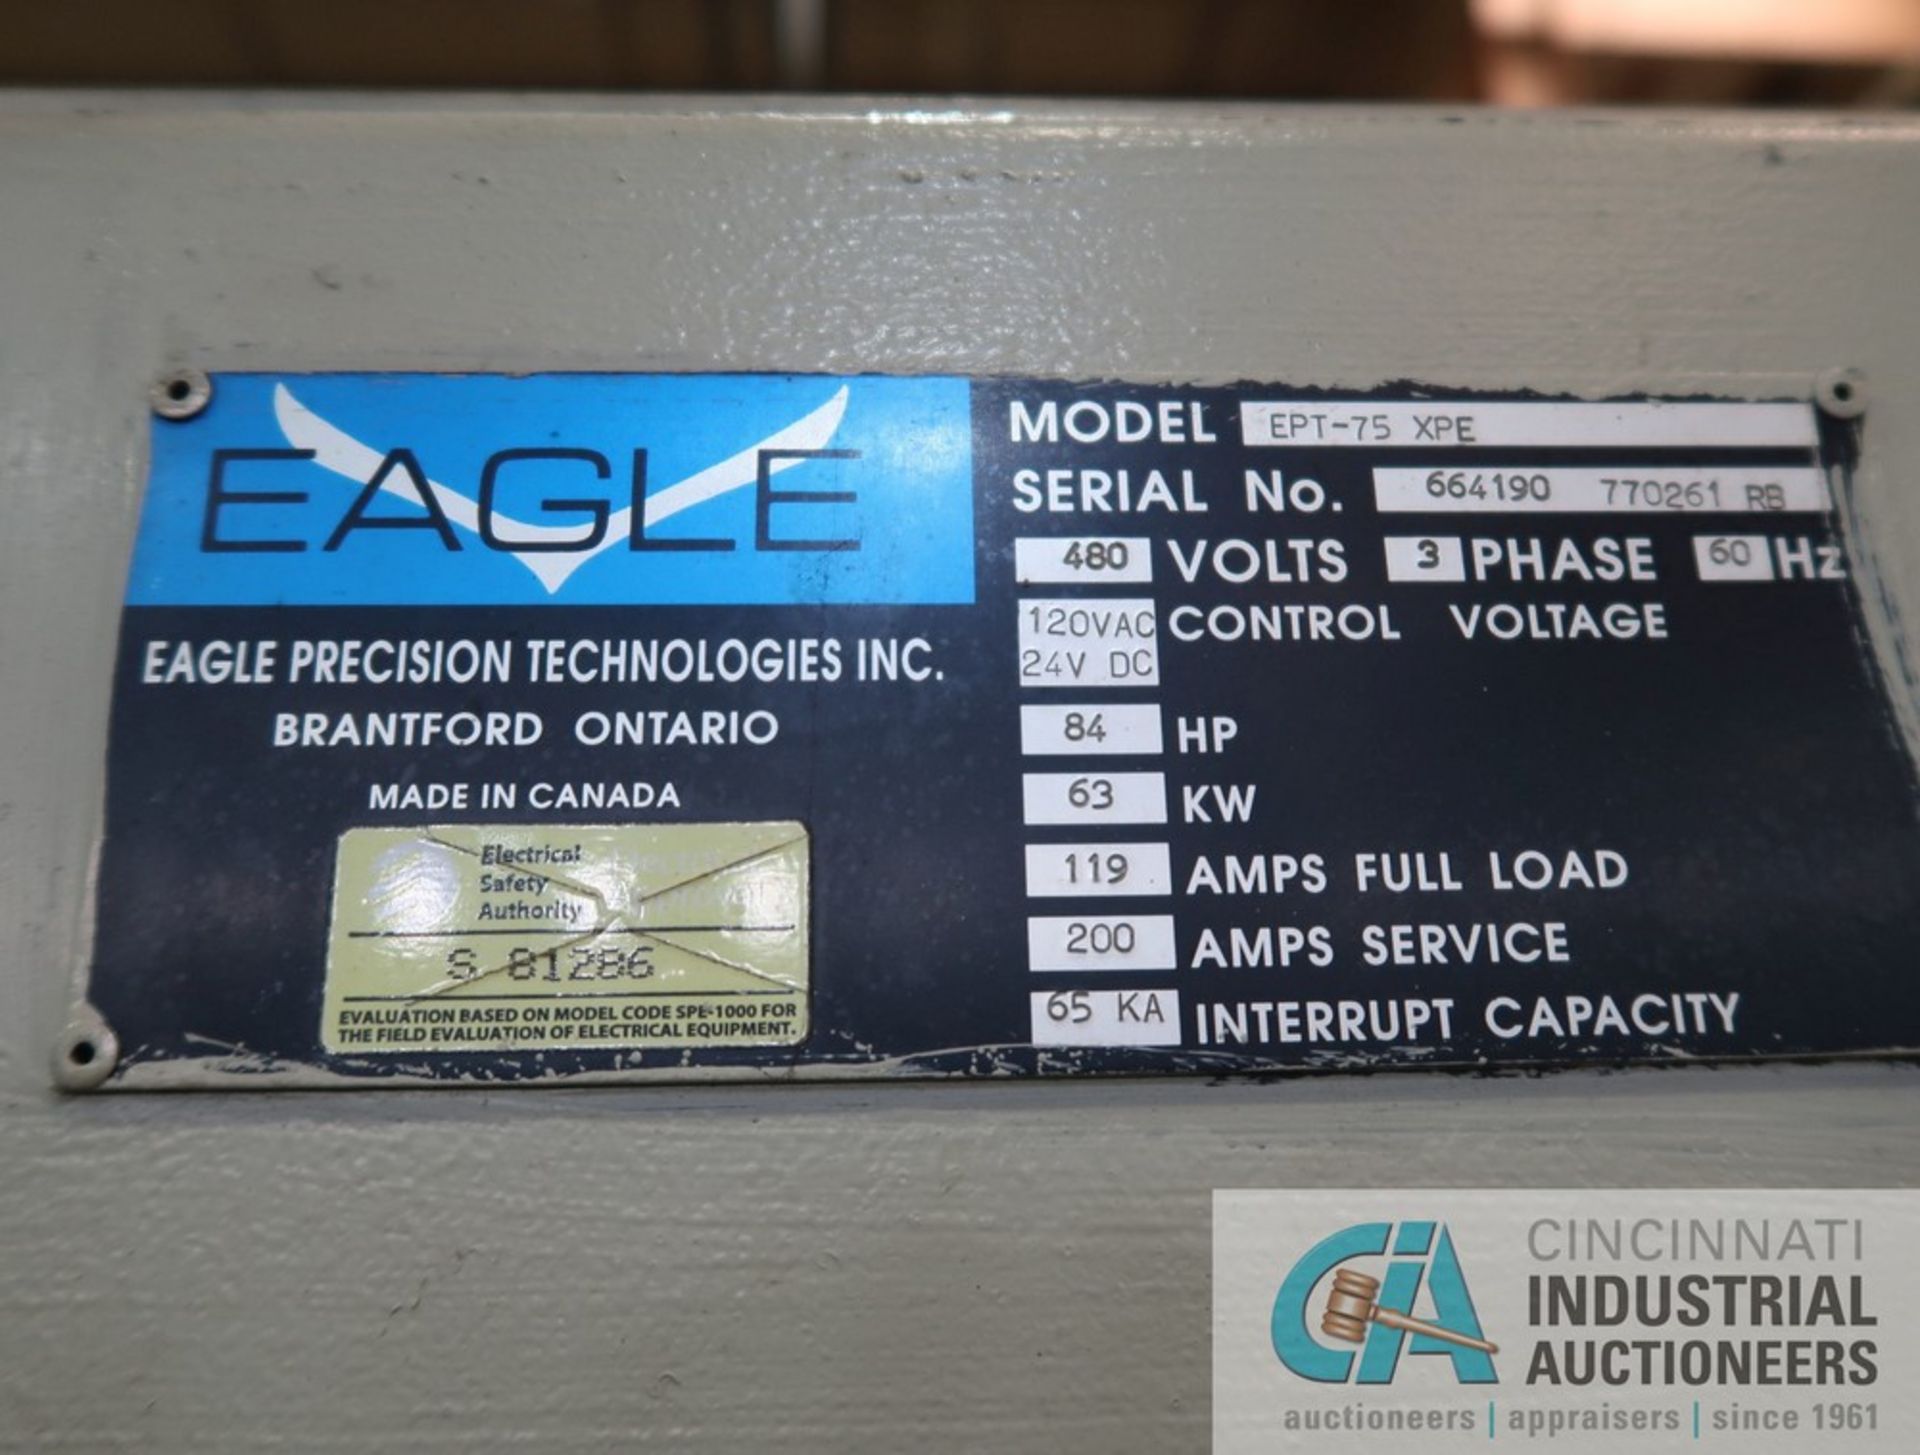 75 MM EAGLE MODEL EPT-75 XPE MULTI-STACK 5-AXIS CNC HYDRUALIC BENDER; S/N 664190-770261-RB, ASSET - Image 12 of 15